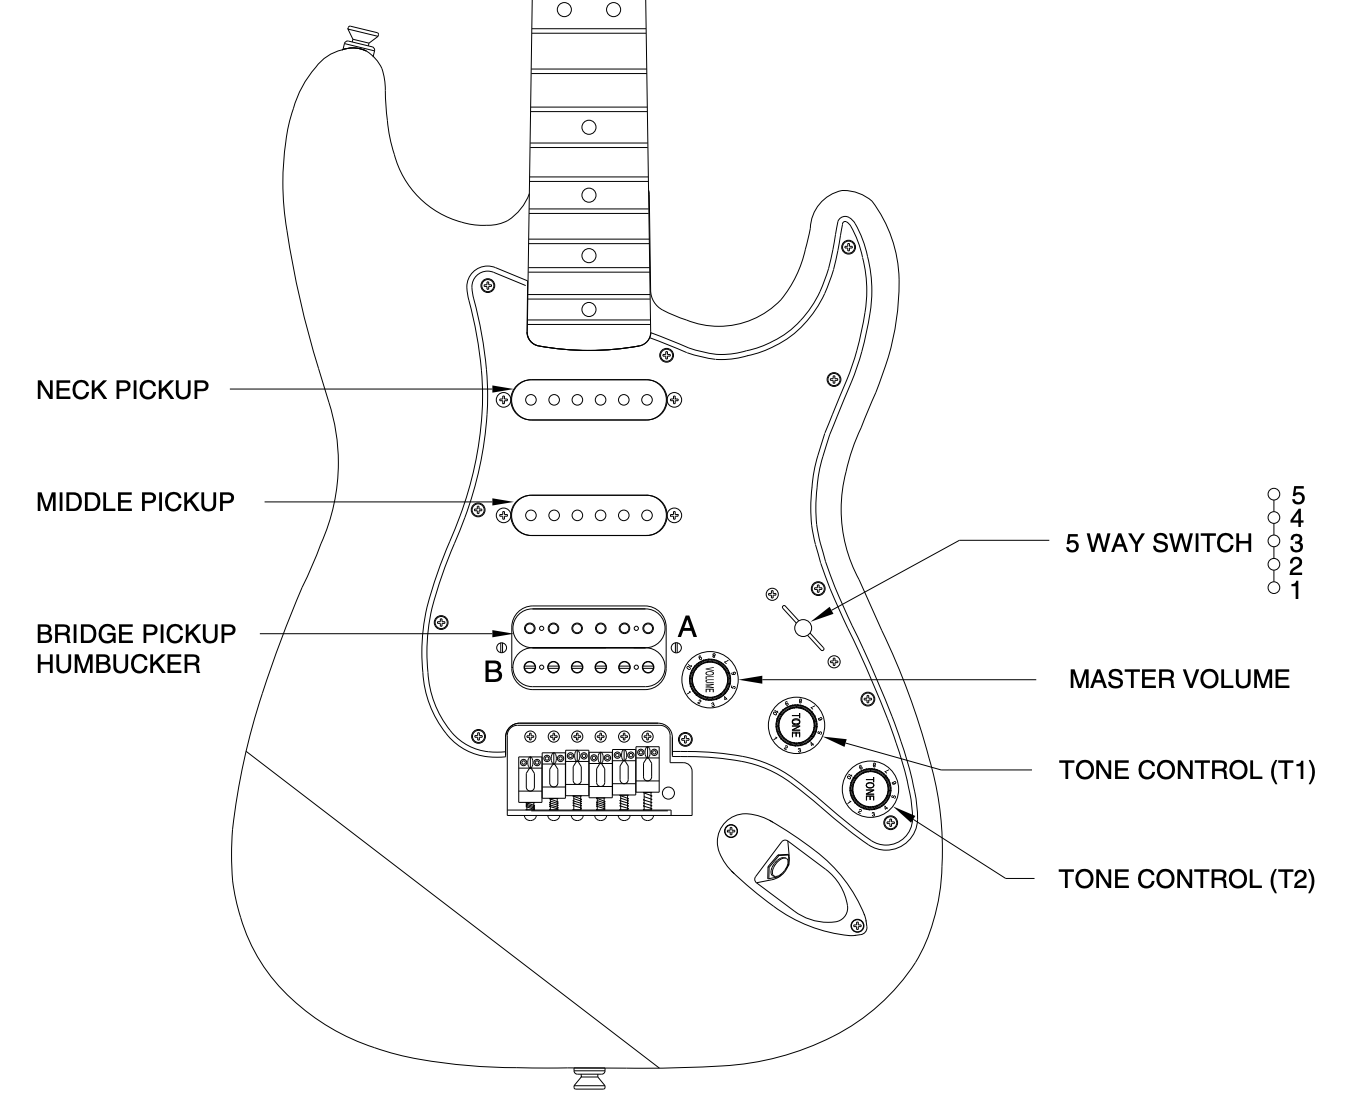 The Ultimate Stratocaster Tone Test Cole The Startup | Medium